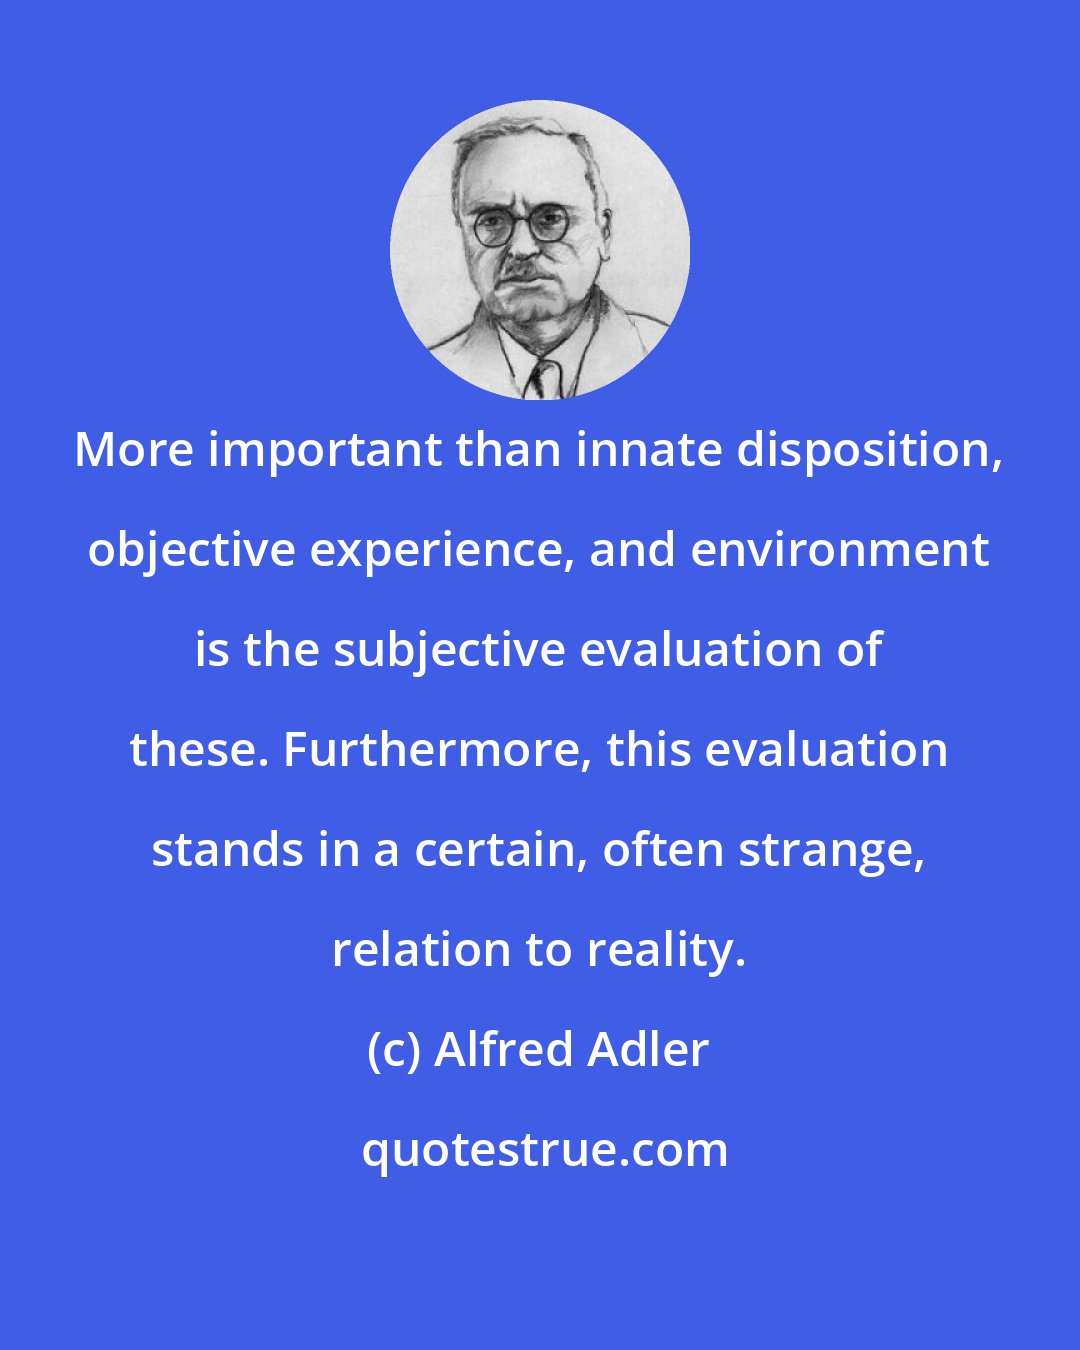 Alfred Adler: More important than innate disposition, objective experience, and environment is the subjective evaluation of these. Furthermore, this evaluation stands in a certain, often strange, relation to reality.